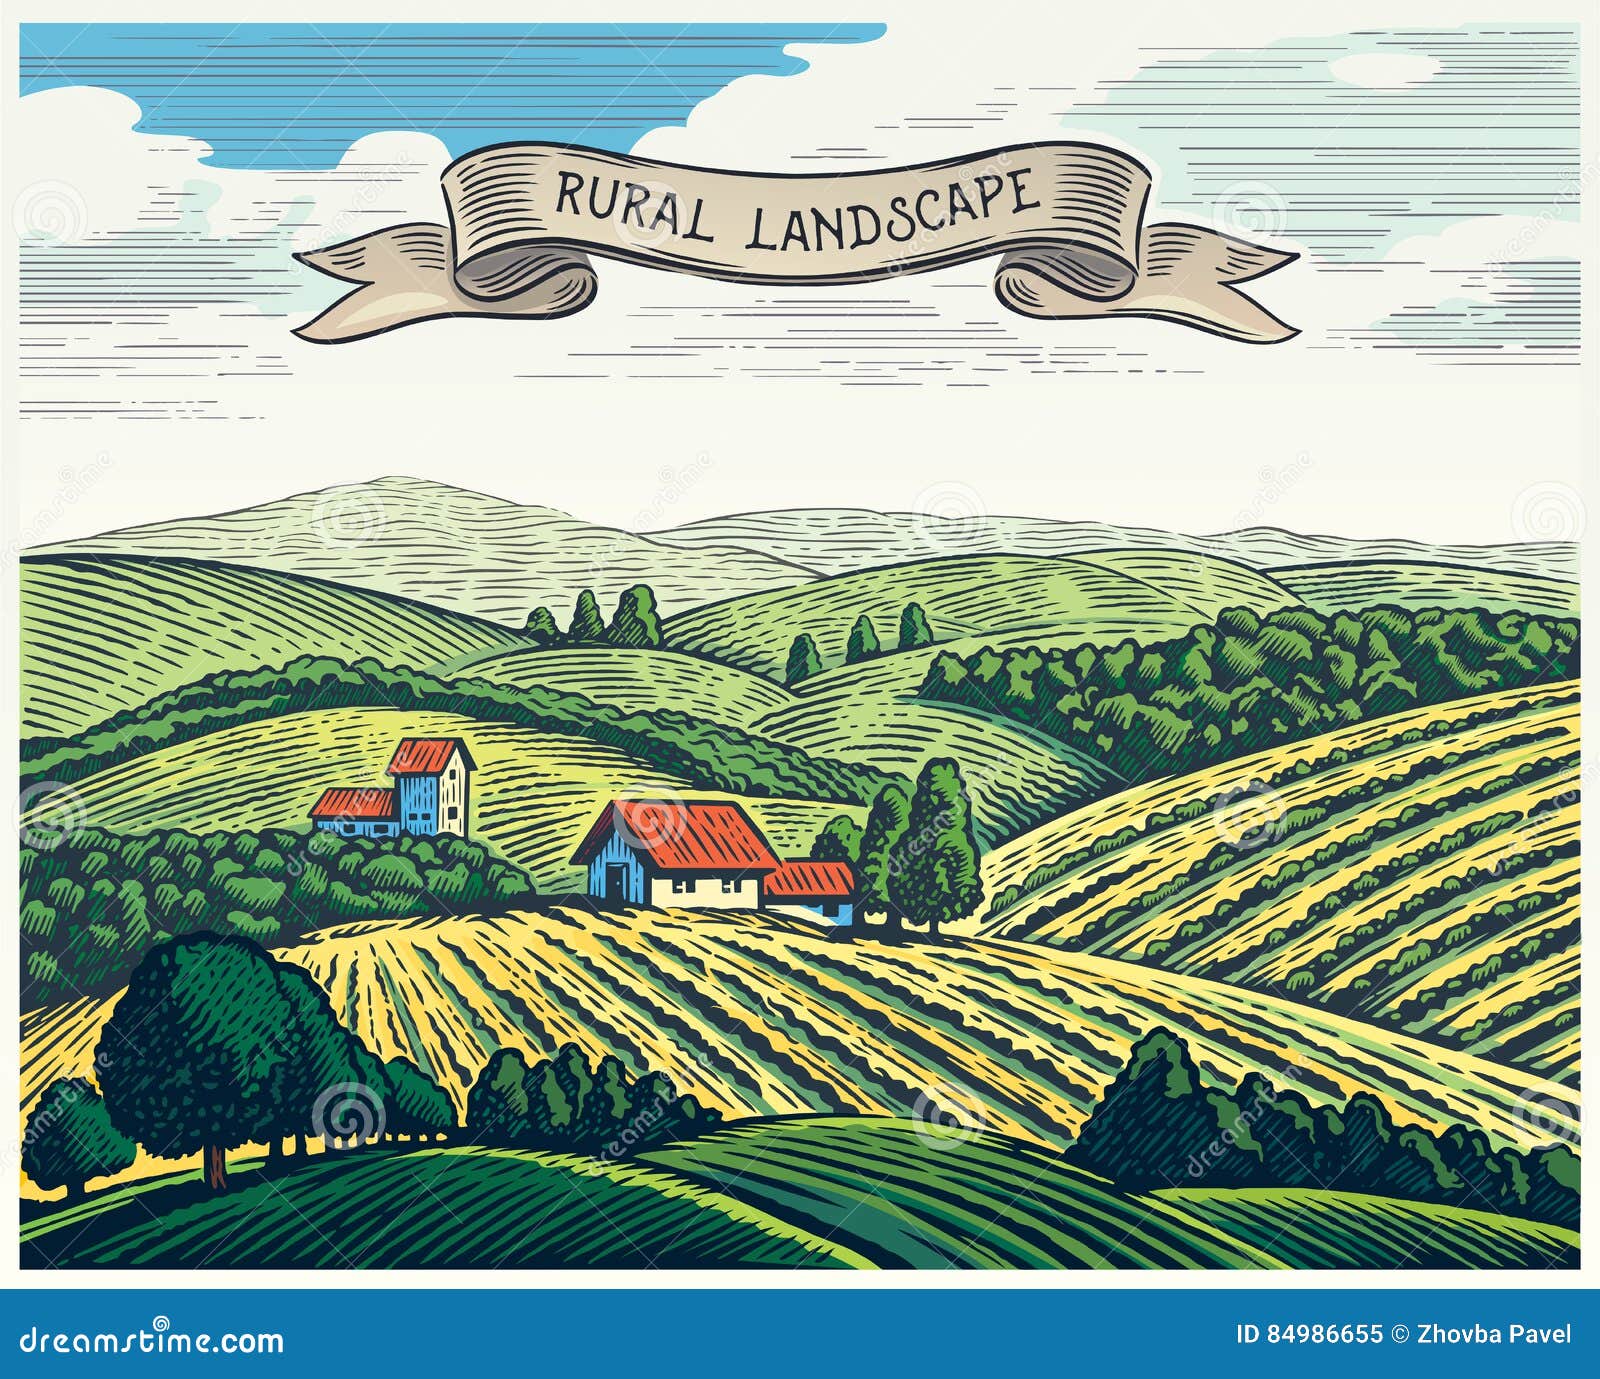 rural landscape in graphical style.